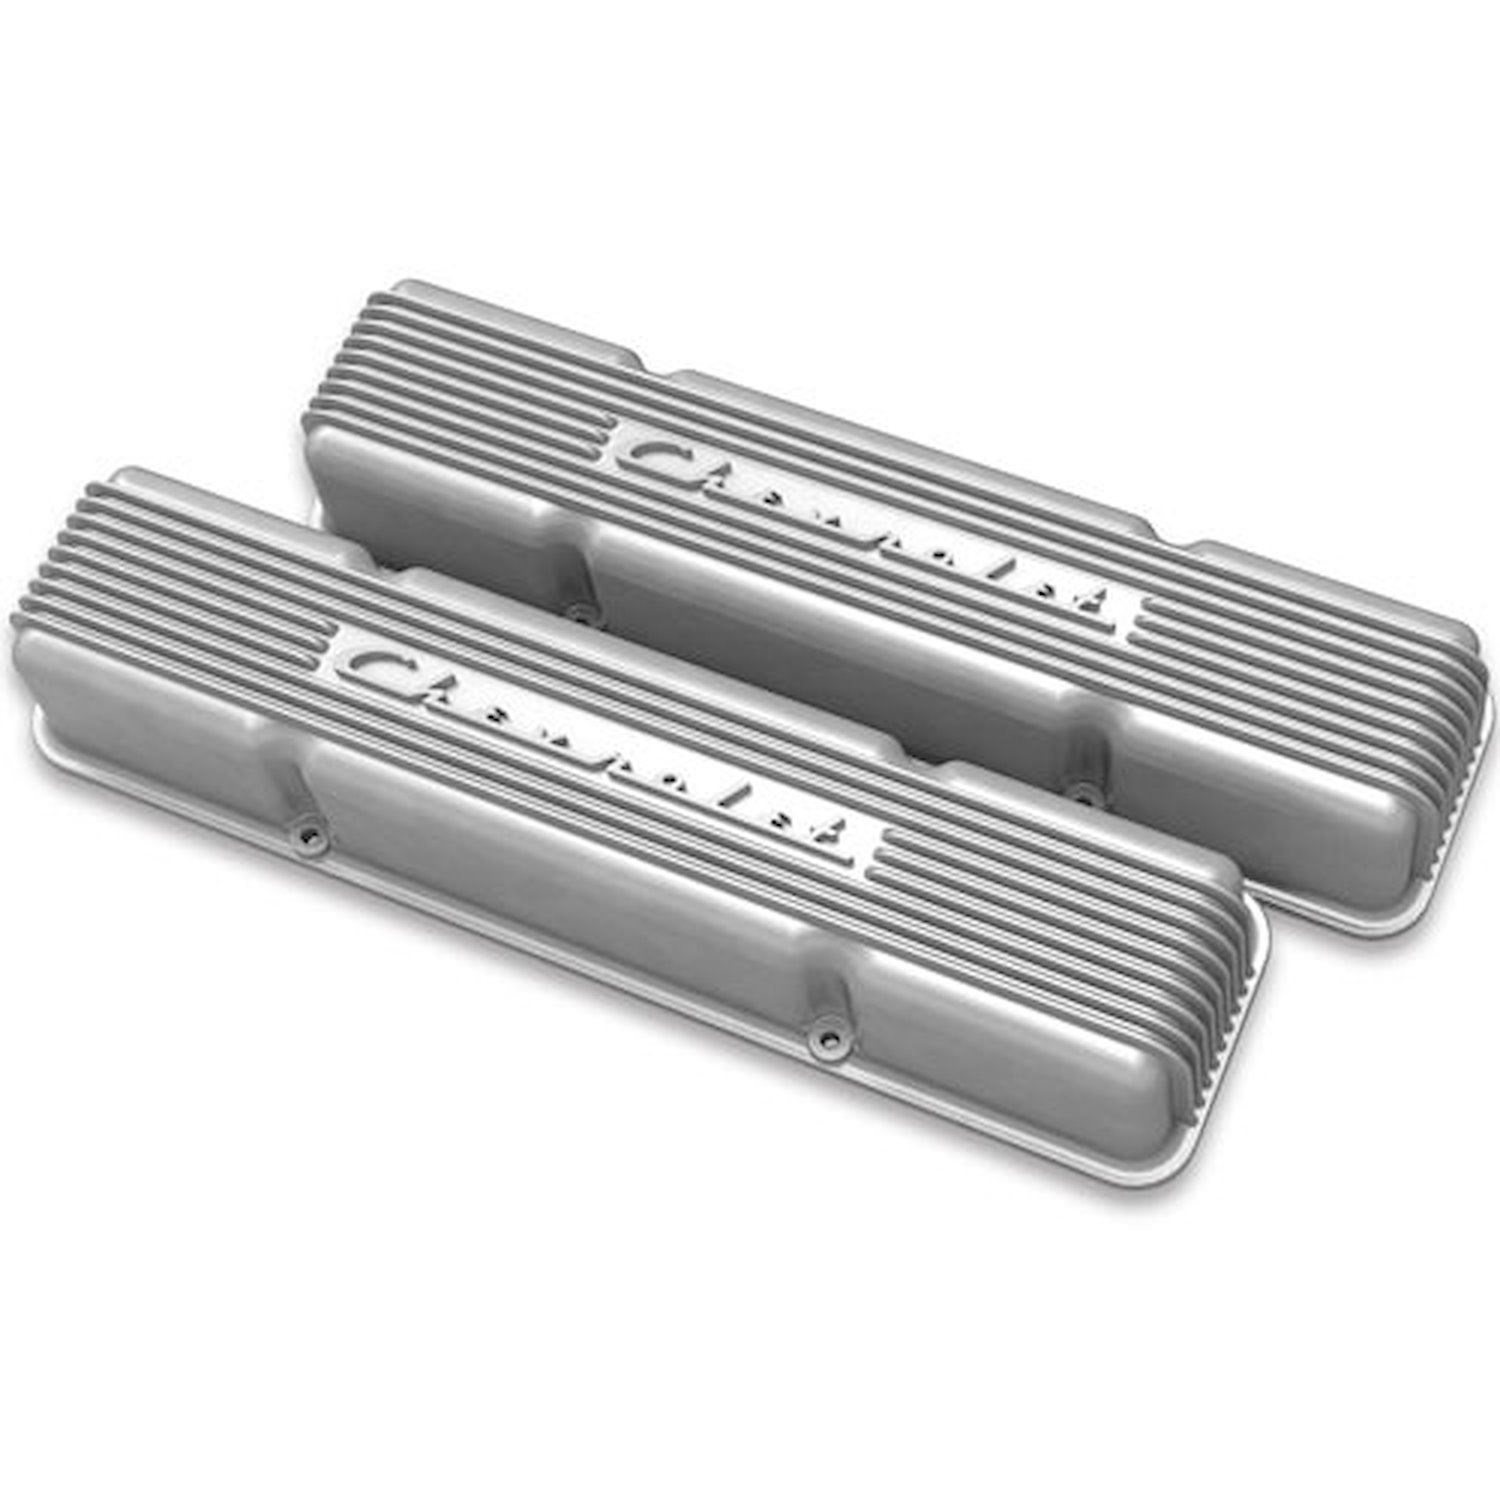 Officially Licensed Chevrolet Vintage Series Finned Valve Covers